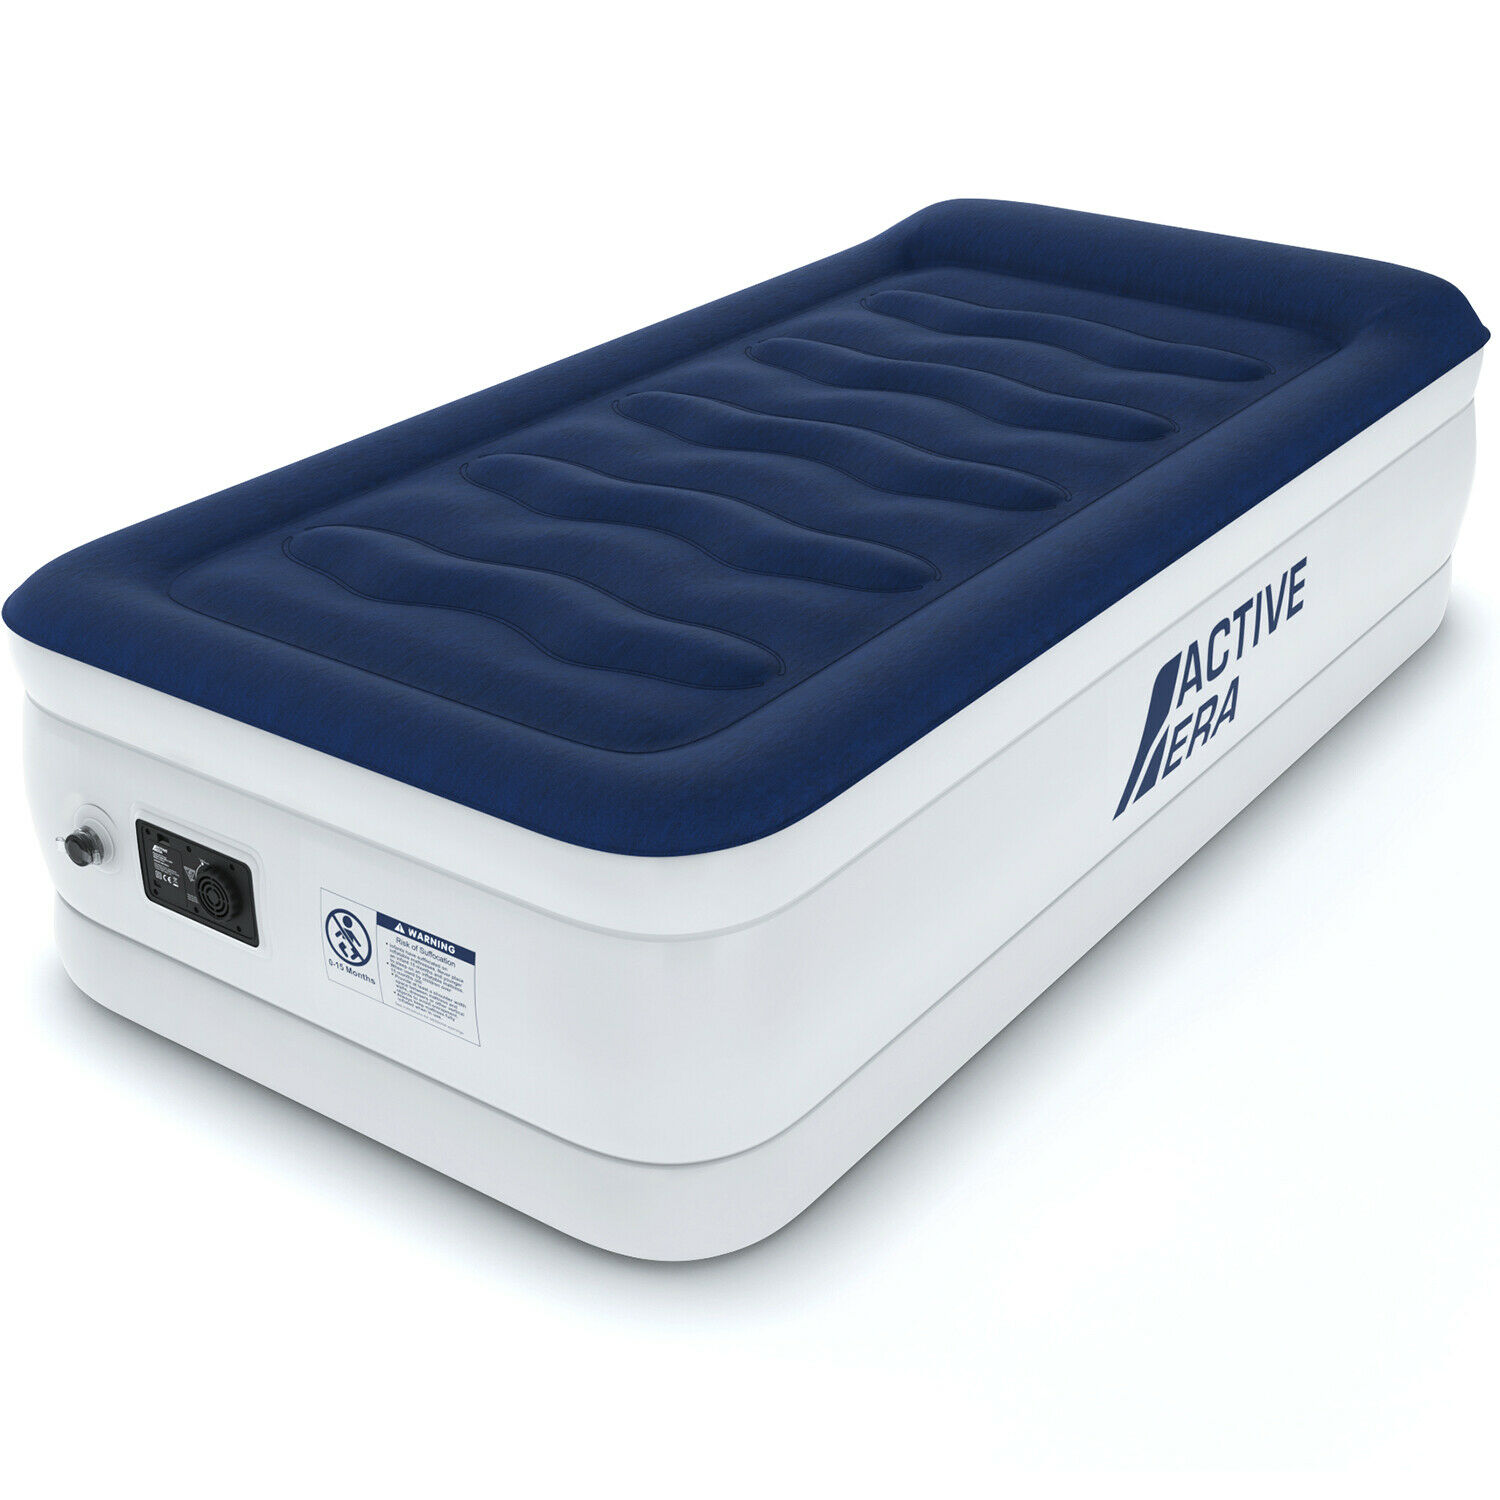 Active Era® Luxury Air Mattress Air Bed Inflatable Bed W/ Built-in Pump, Twin